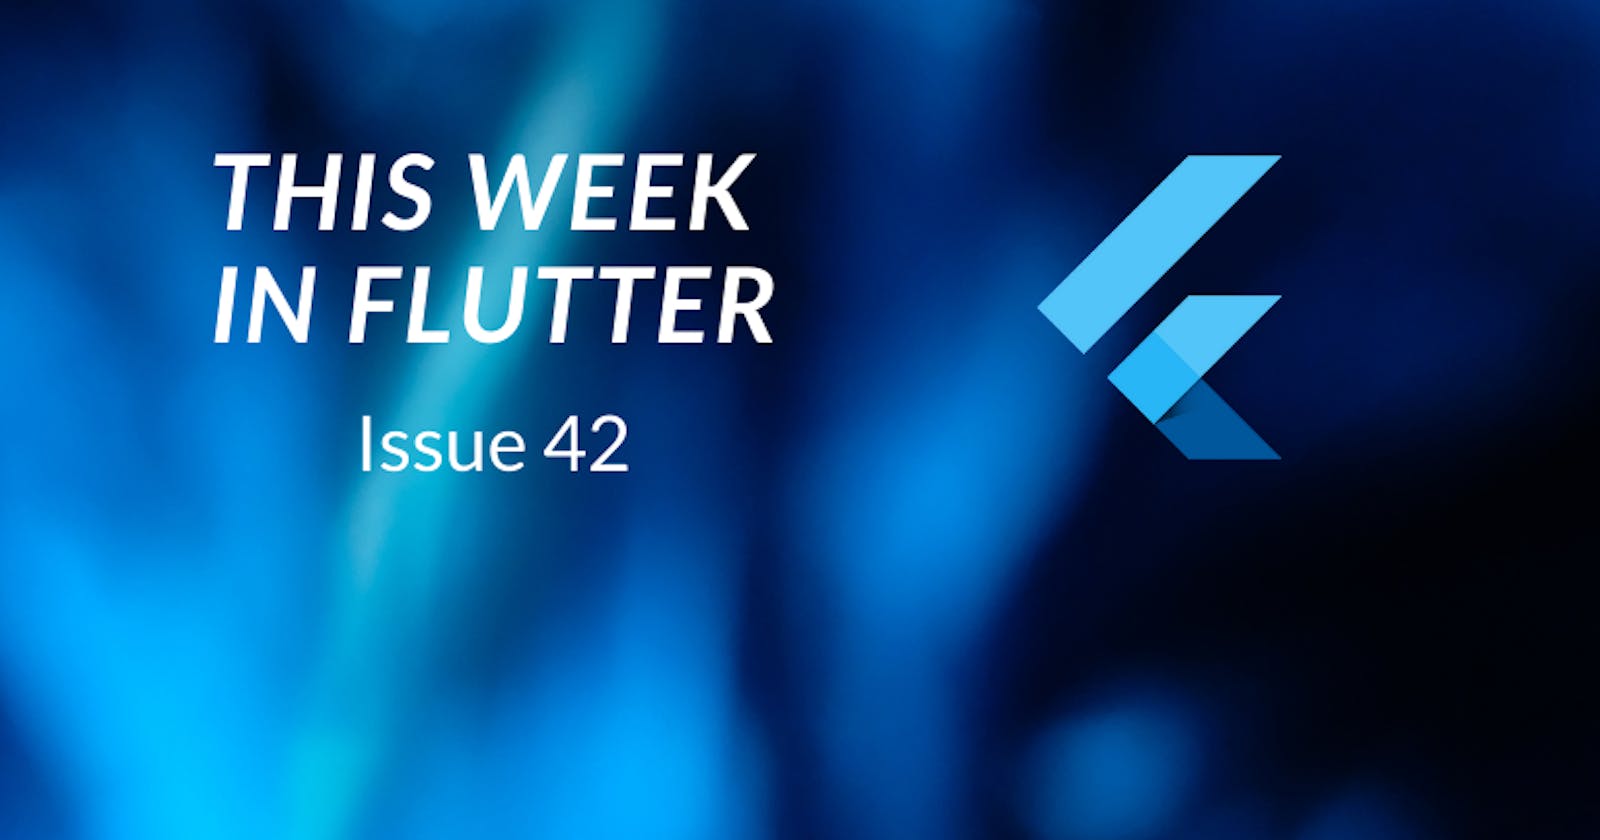 This week in Flutter #42